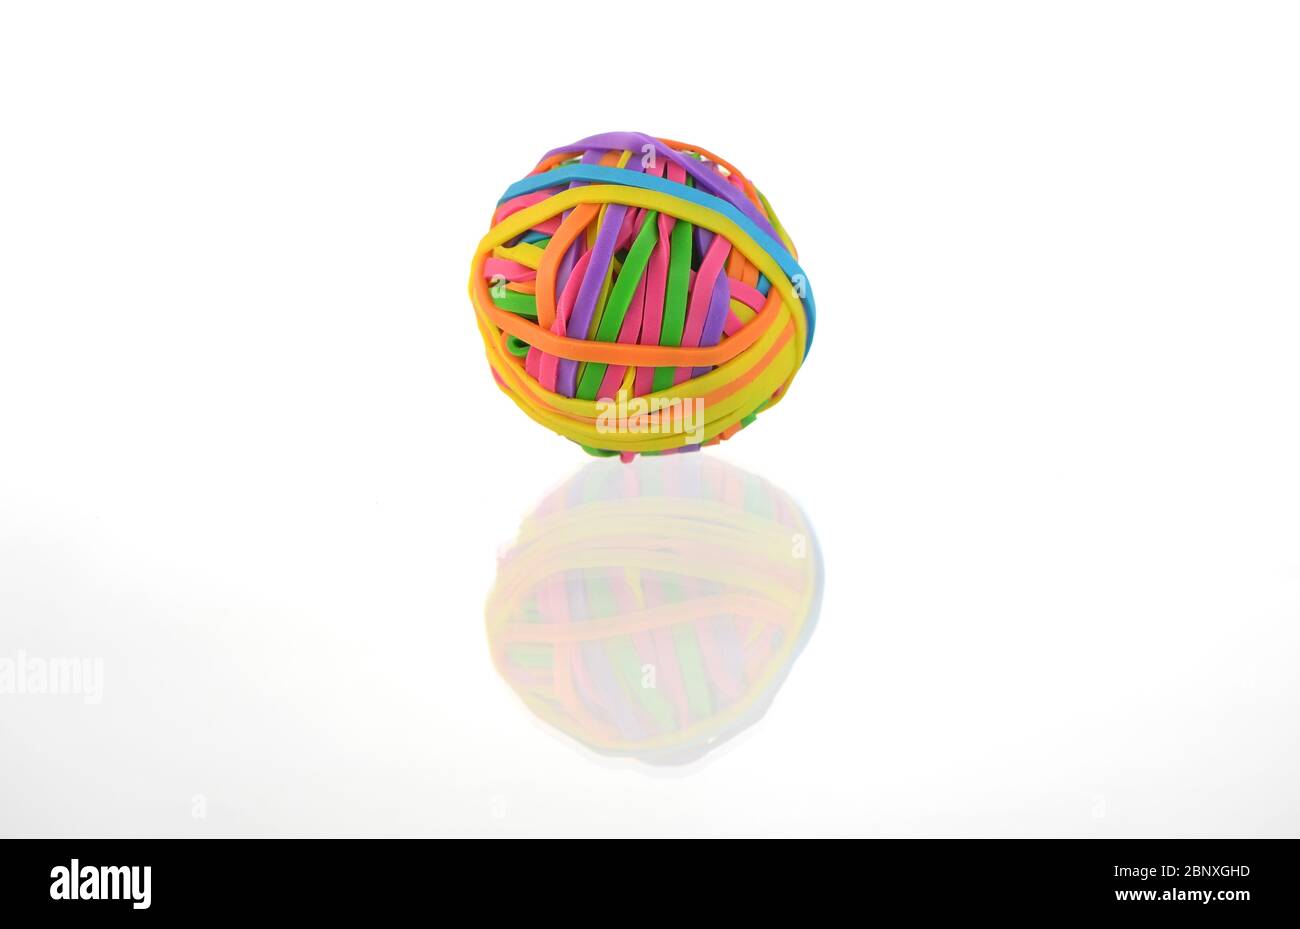 A colourful ball of elastic bands isolated against a white background with a reflection. Stock Photo